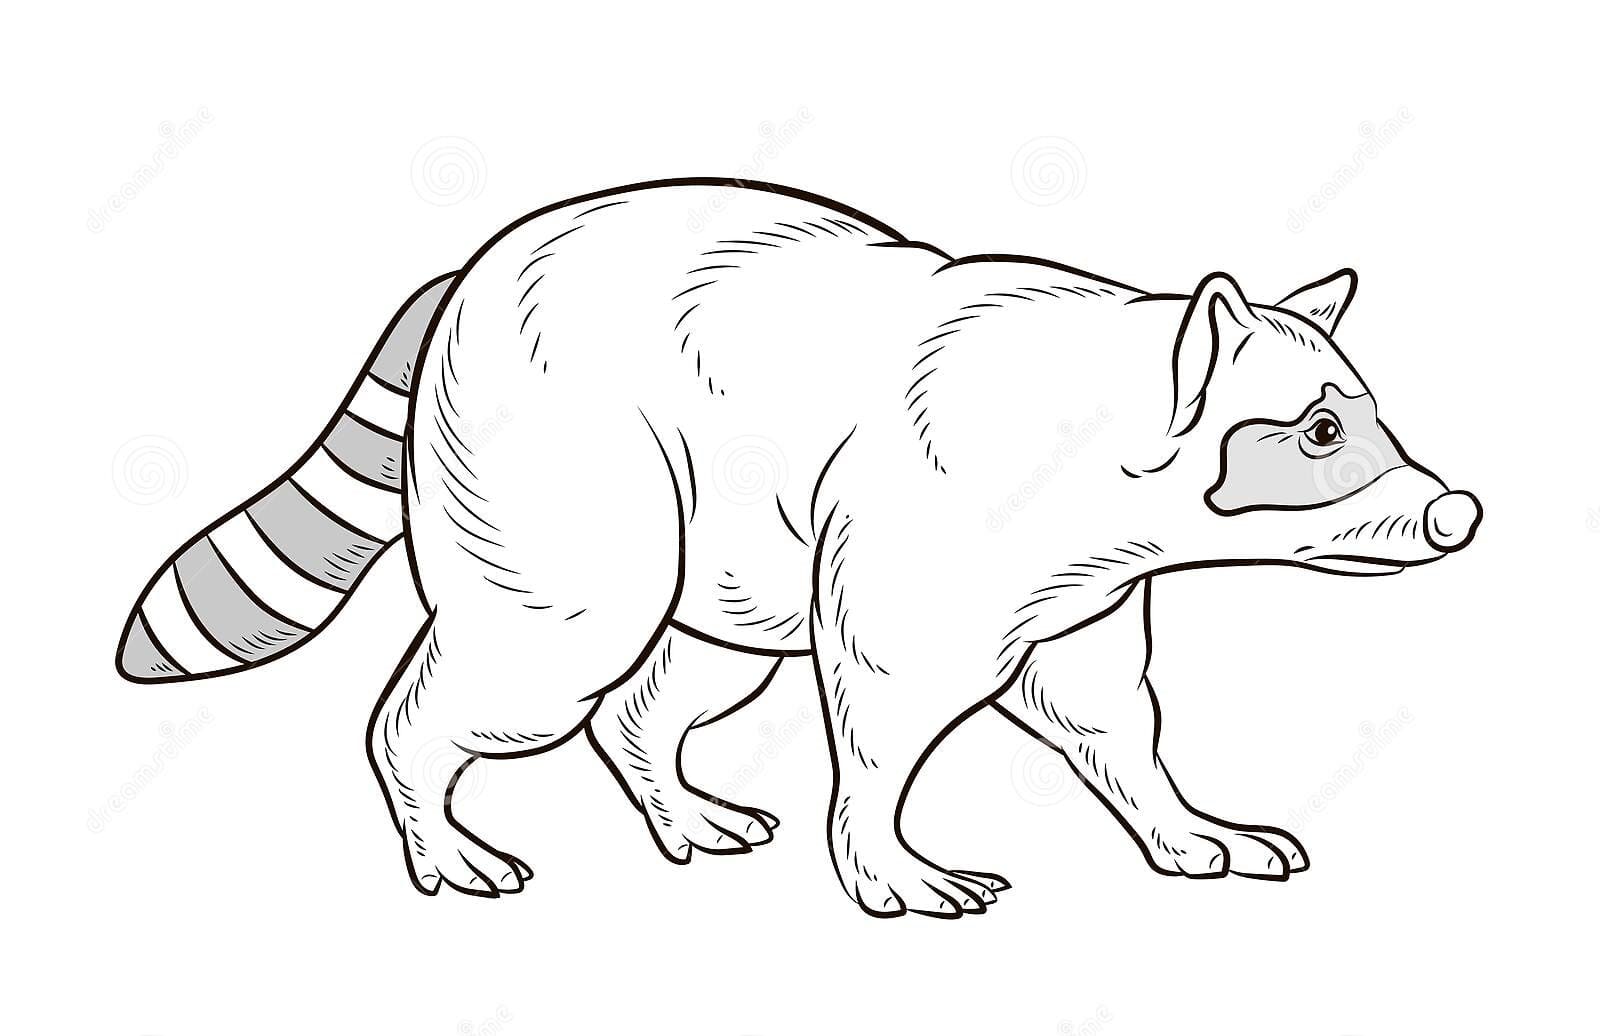 Common Raccoon Image Coloring Page